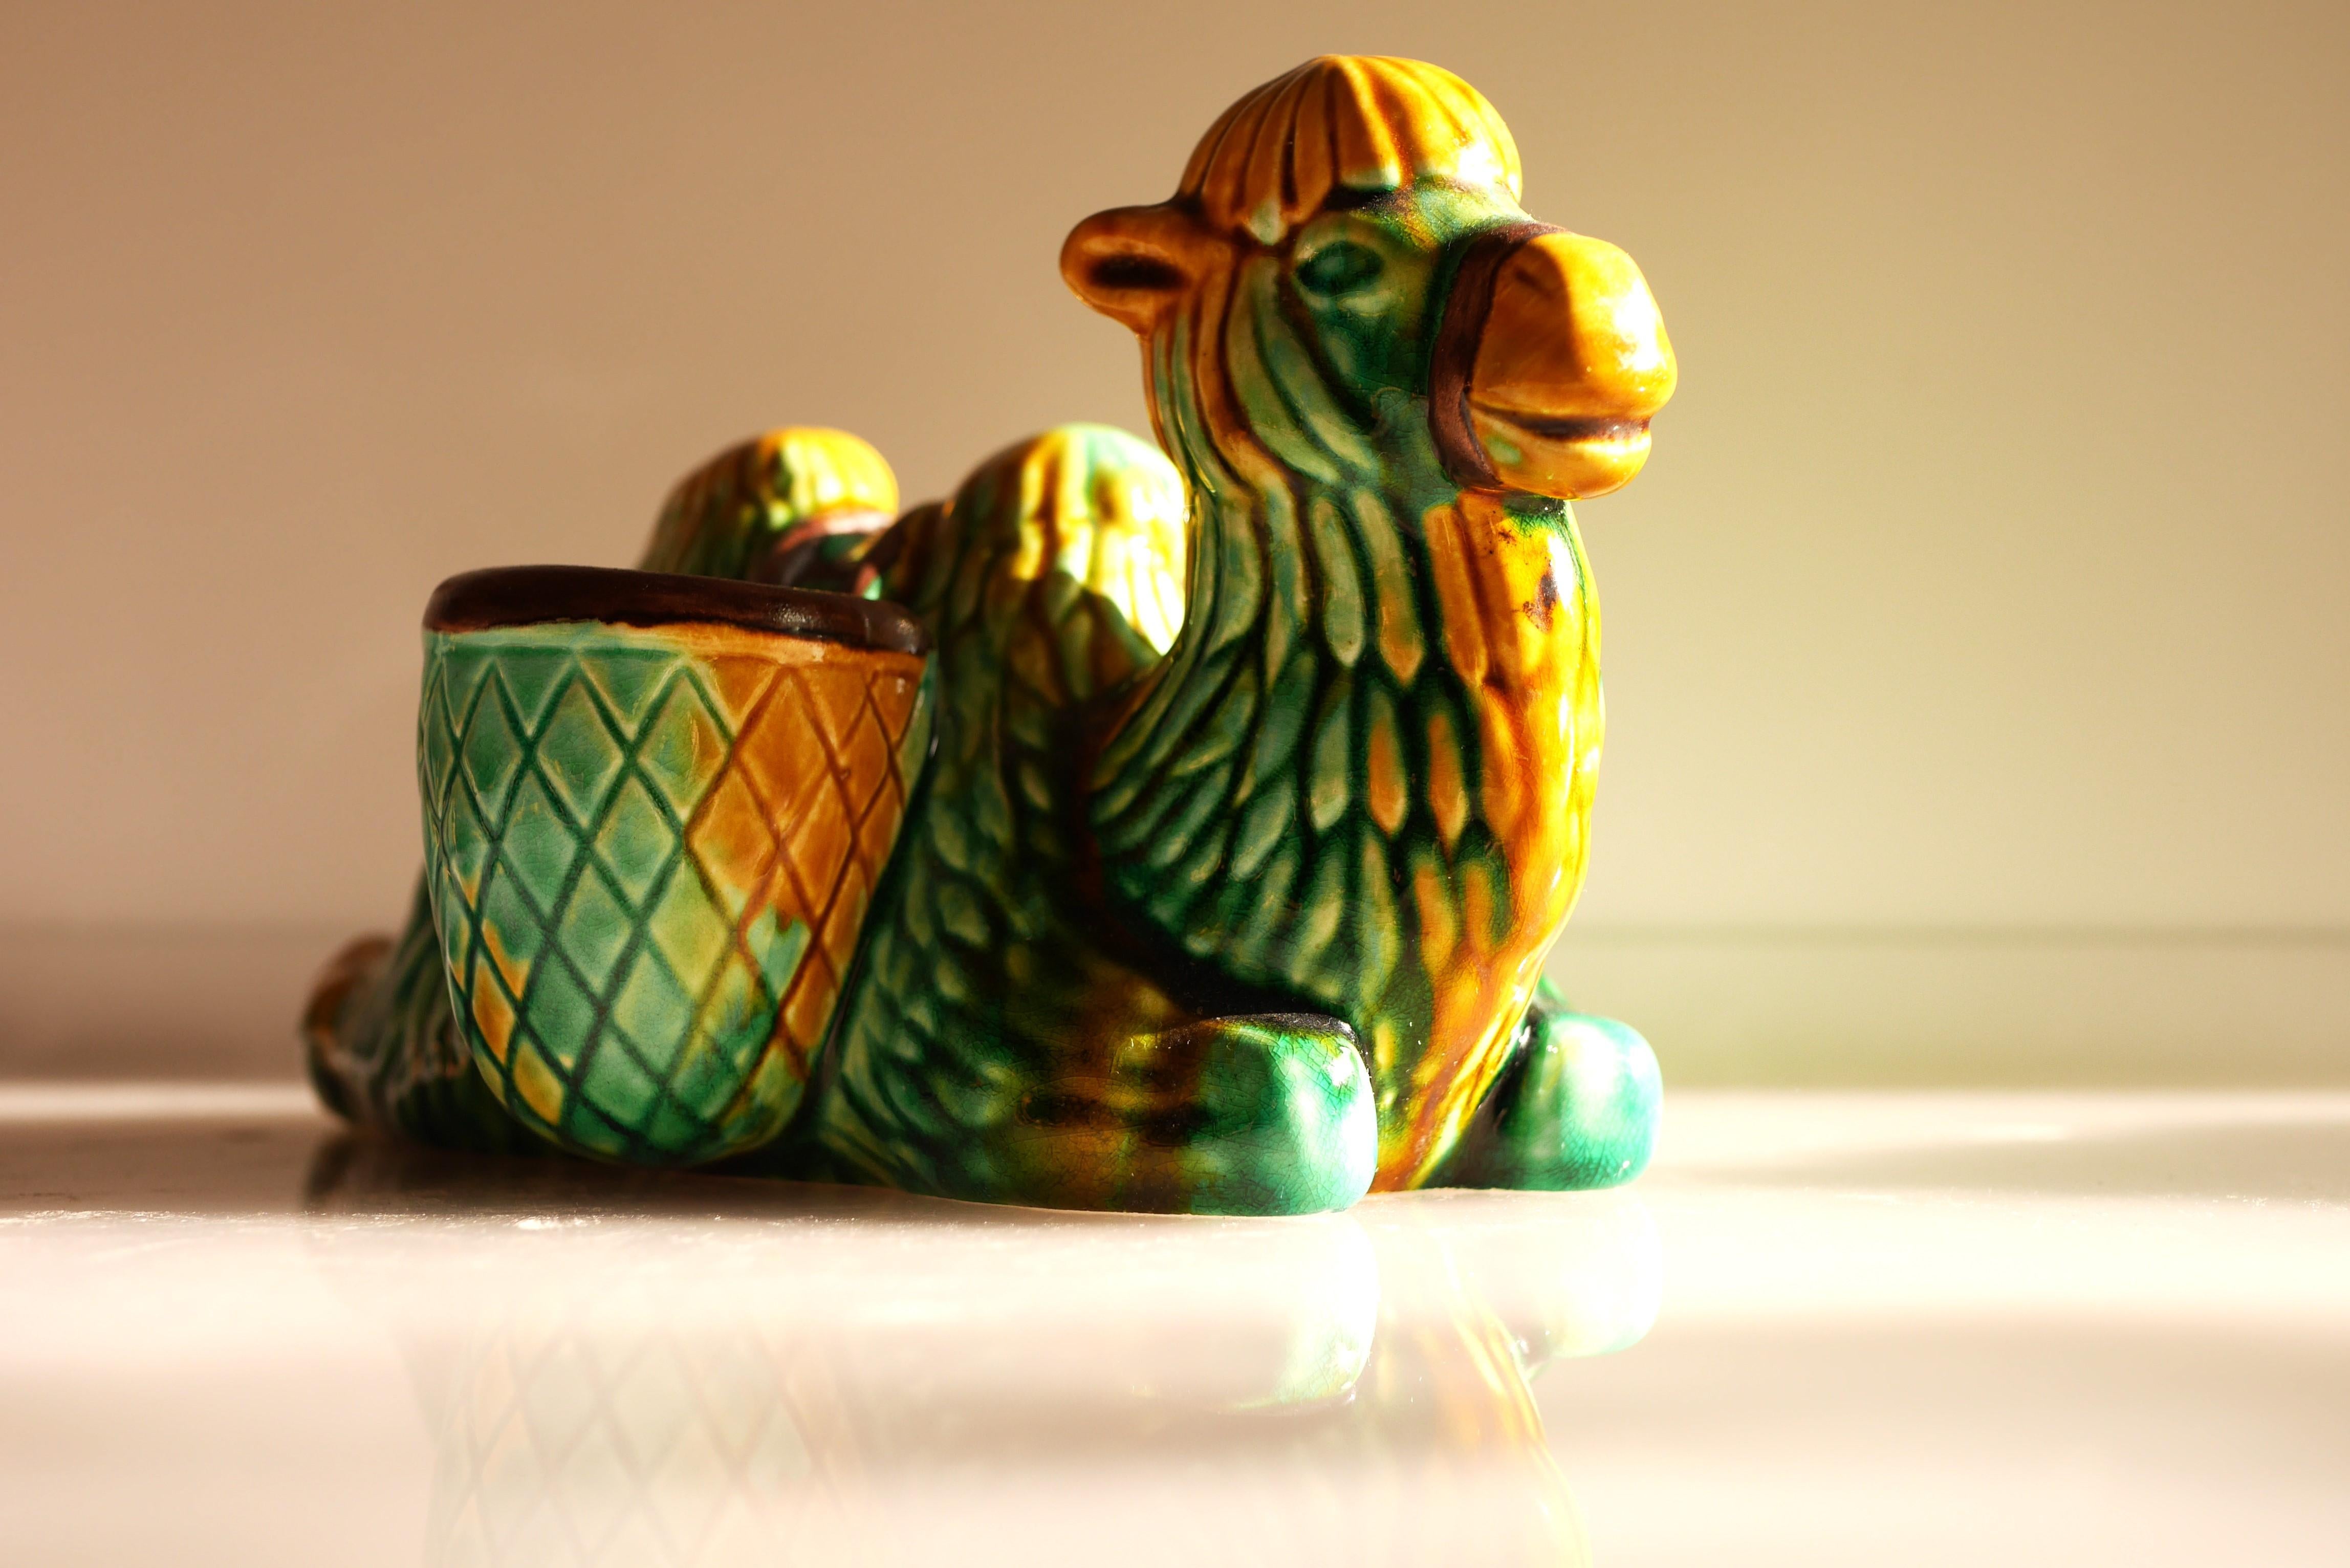 A very rare and stunning vintage porcelain figurine in the shape of a camel stoneware design by very talented Gunnar Nylund for Rörstrand. This is a gorgeous piece and fun, originally mostly used as a quirky toothpick holder, which has and